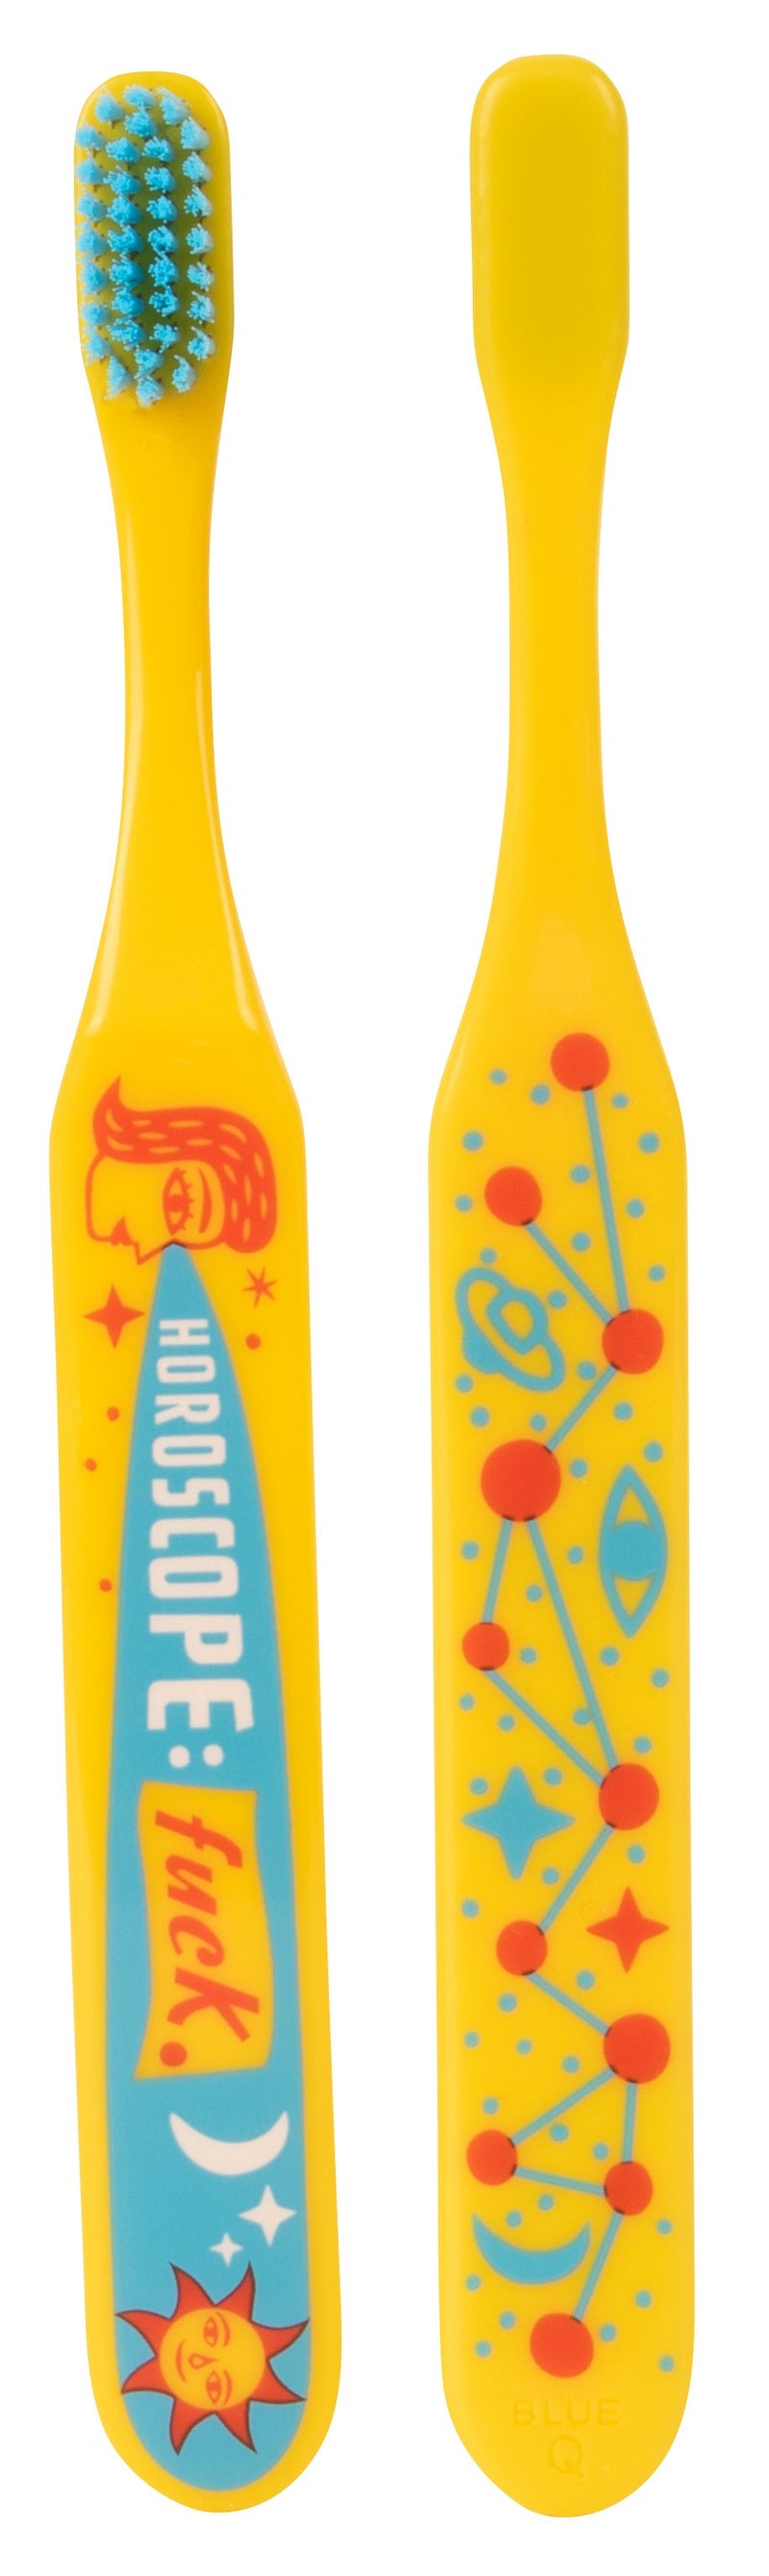 "Horoscope: Fuck." Toothbrush | Soft BPA-Free Funny Toothbrush Packaged for Gifting | Art on Both Sides